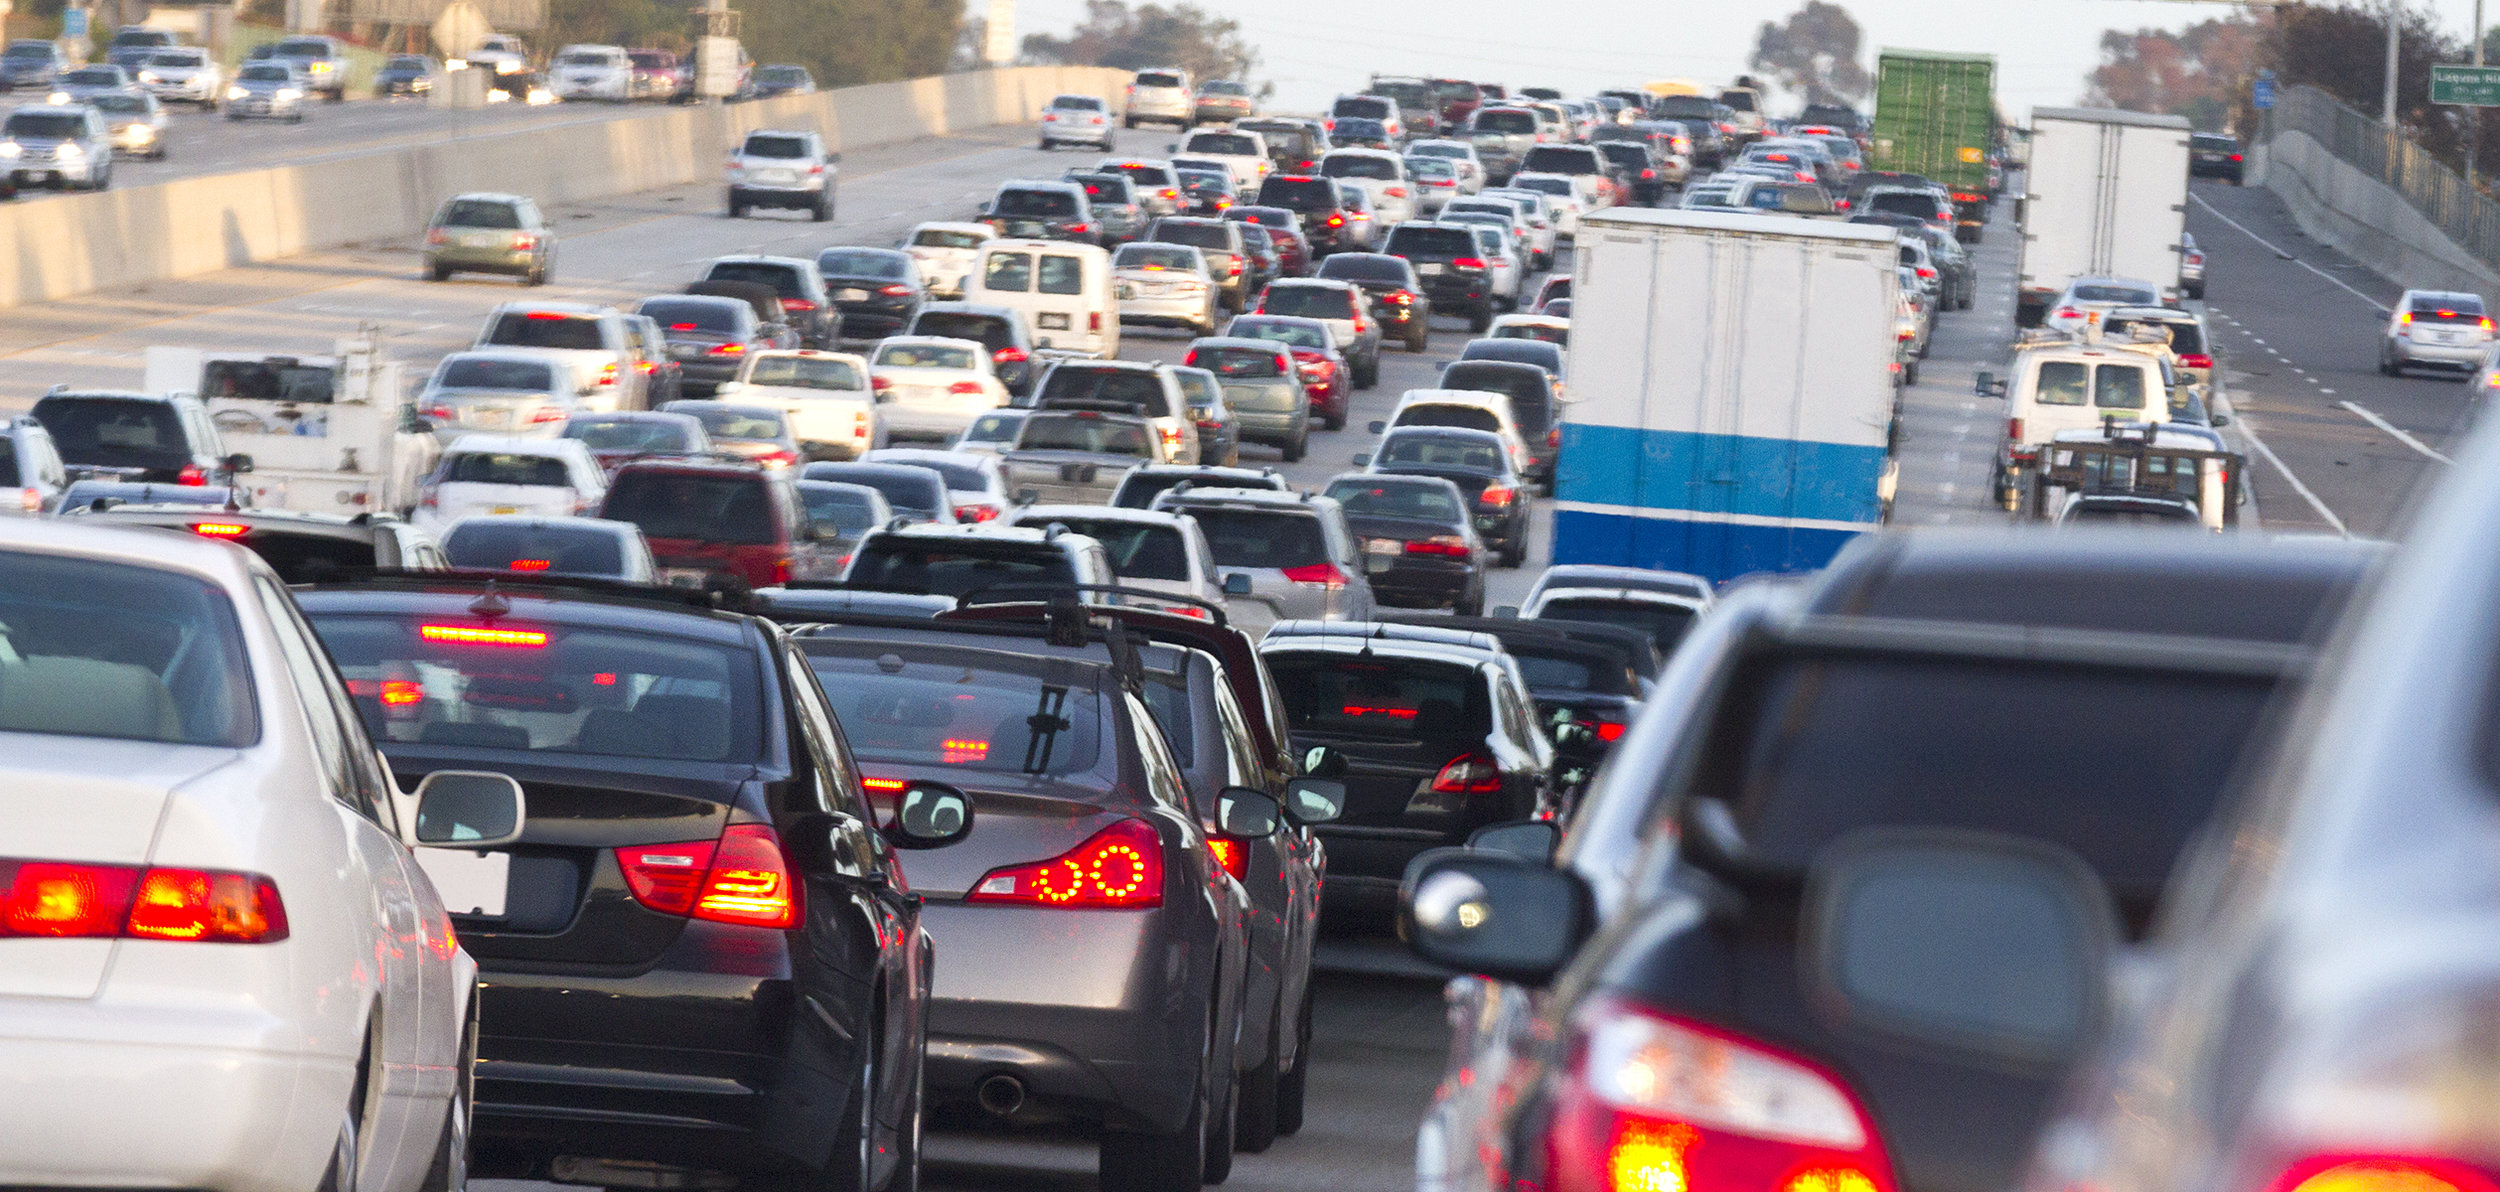  According to the U.S. Census Bureau, the average commute time to work is  25.4 minutes.  